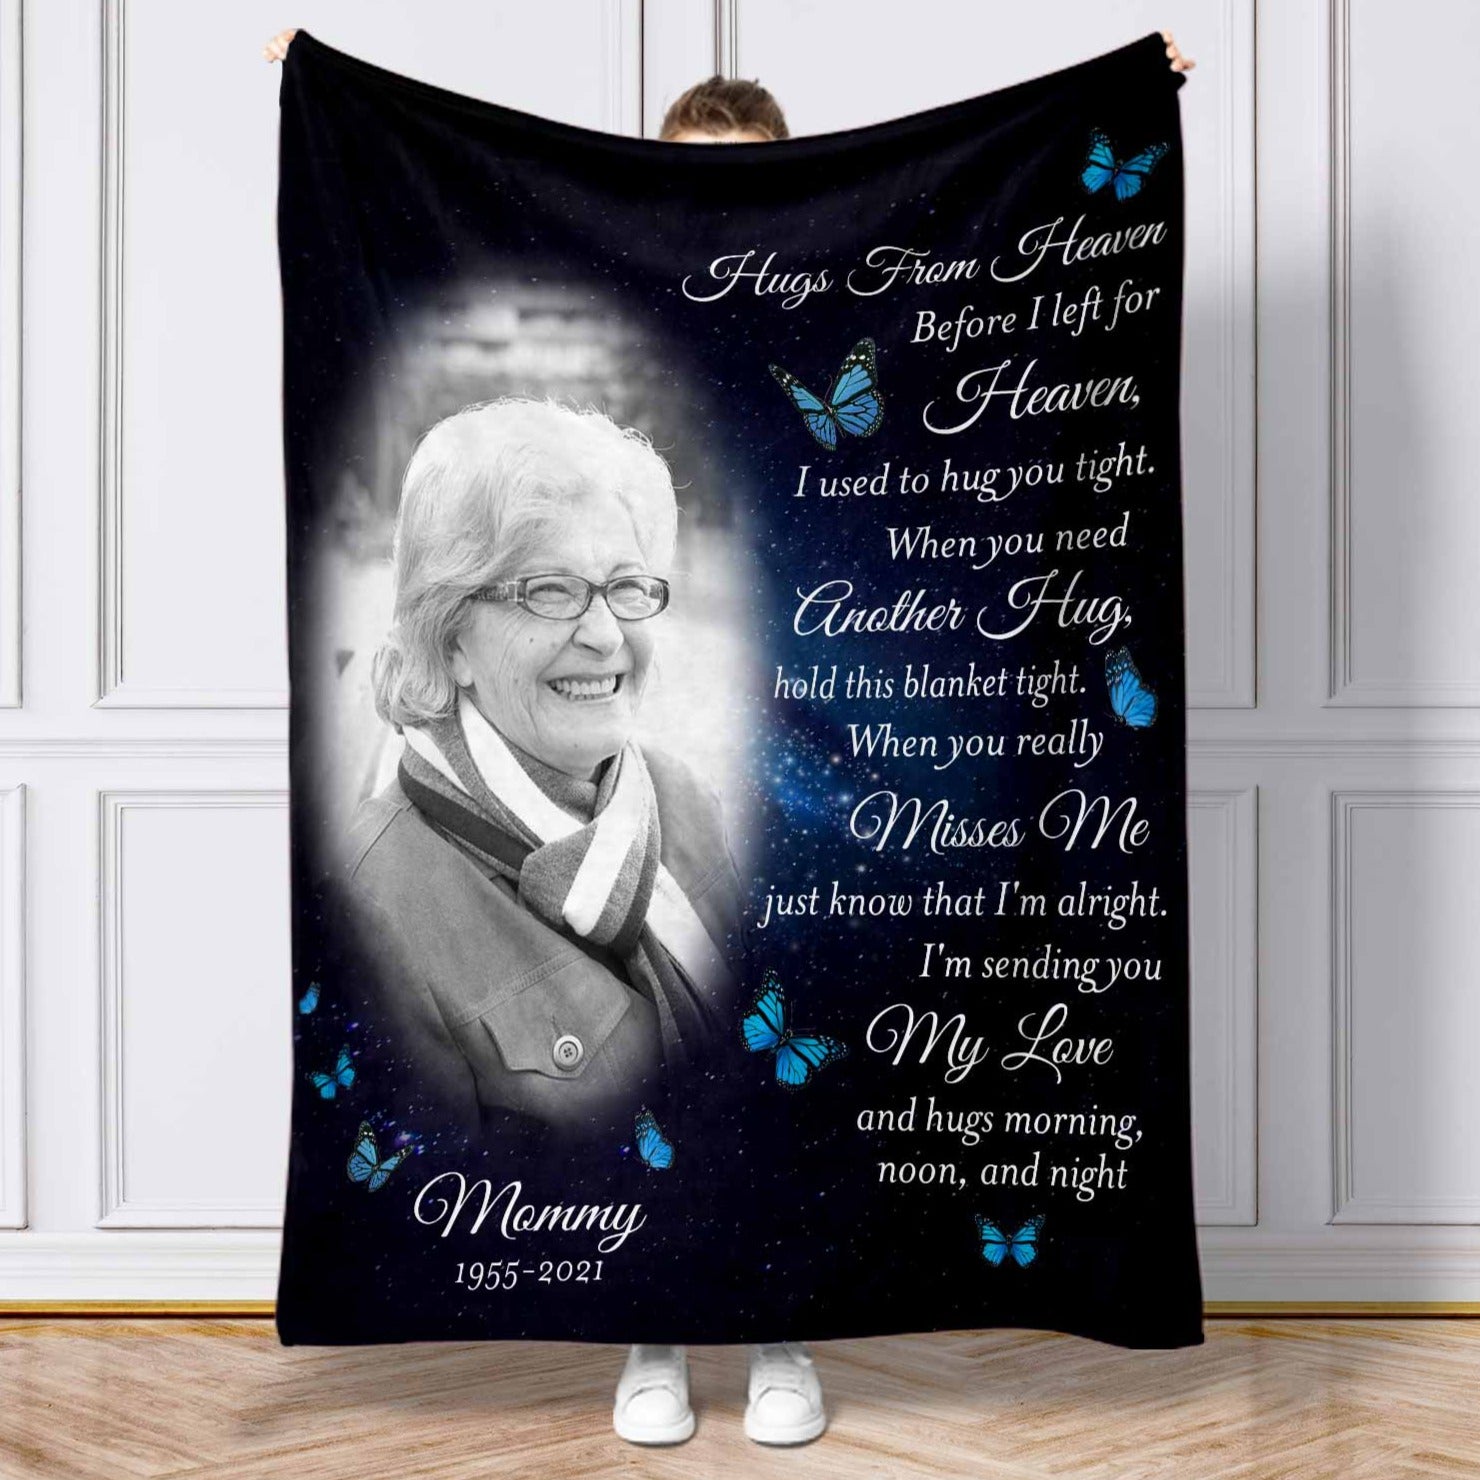 Personalized Memorial Blankets For Loss Of Mother, Sympathy Blanket For Funeral Mothers Day Gift, Hugs From Heaven Blanket